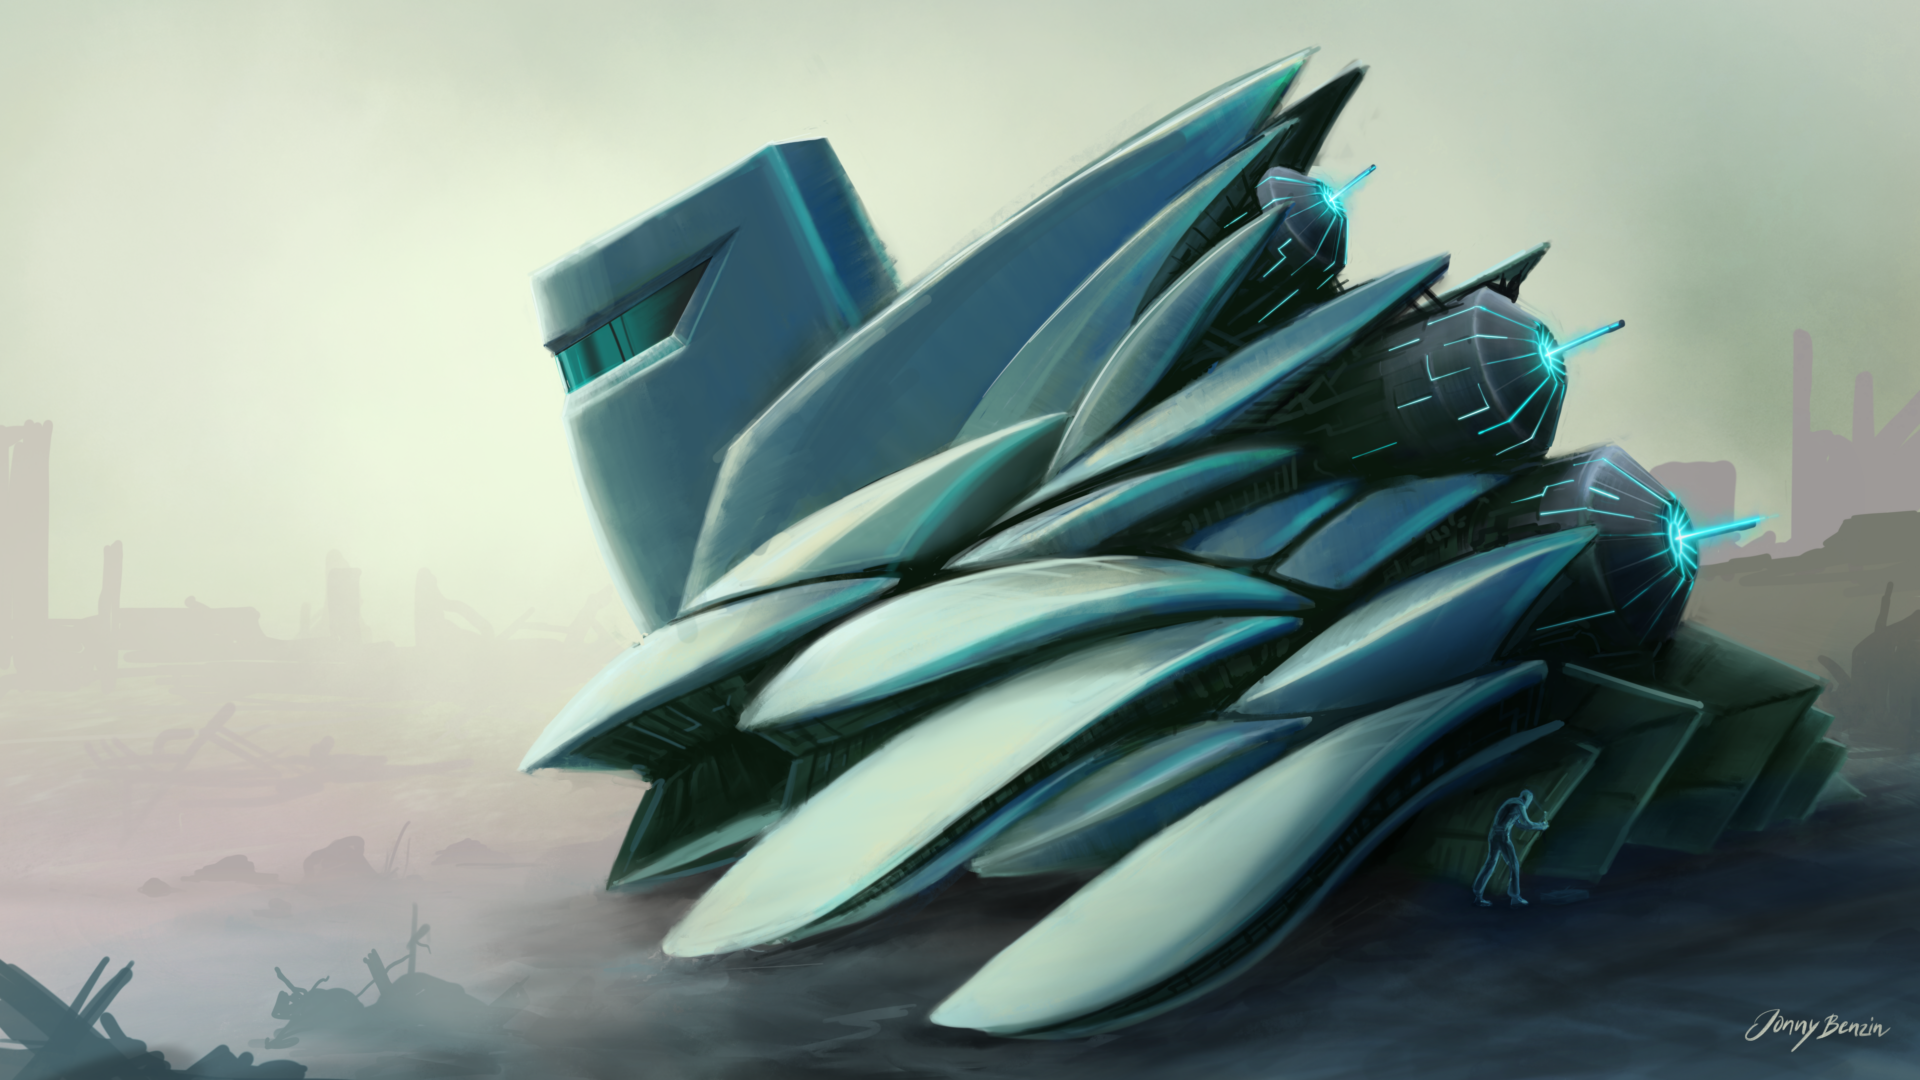 First version of the spaceship in a post-apocalyptic scenario.